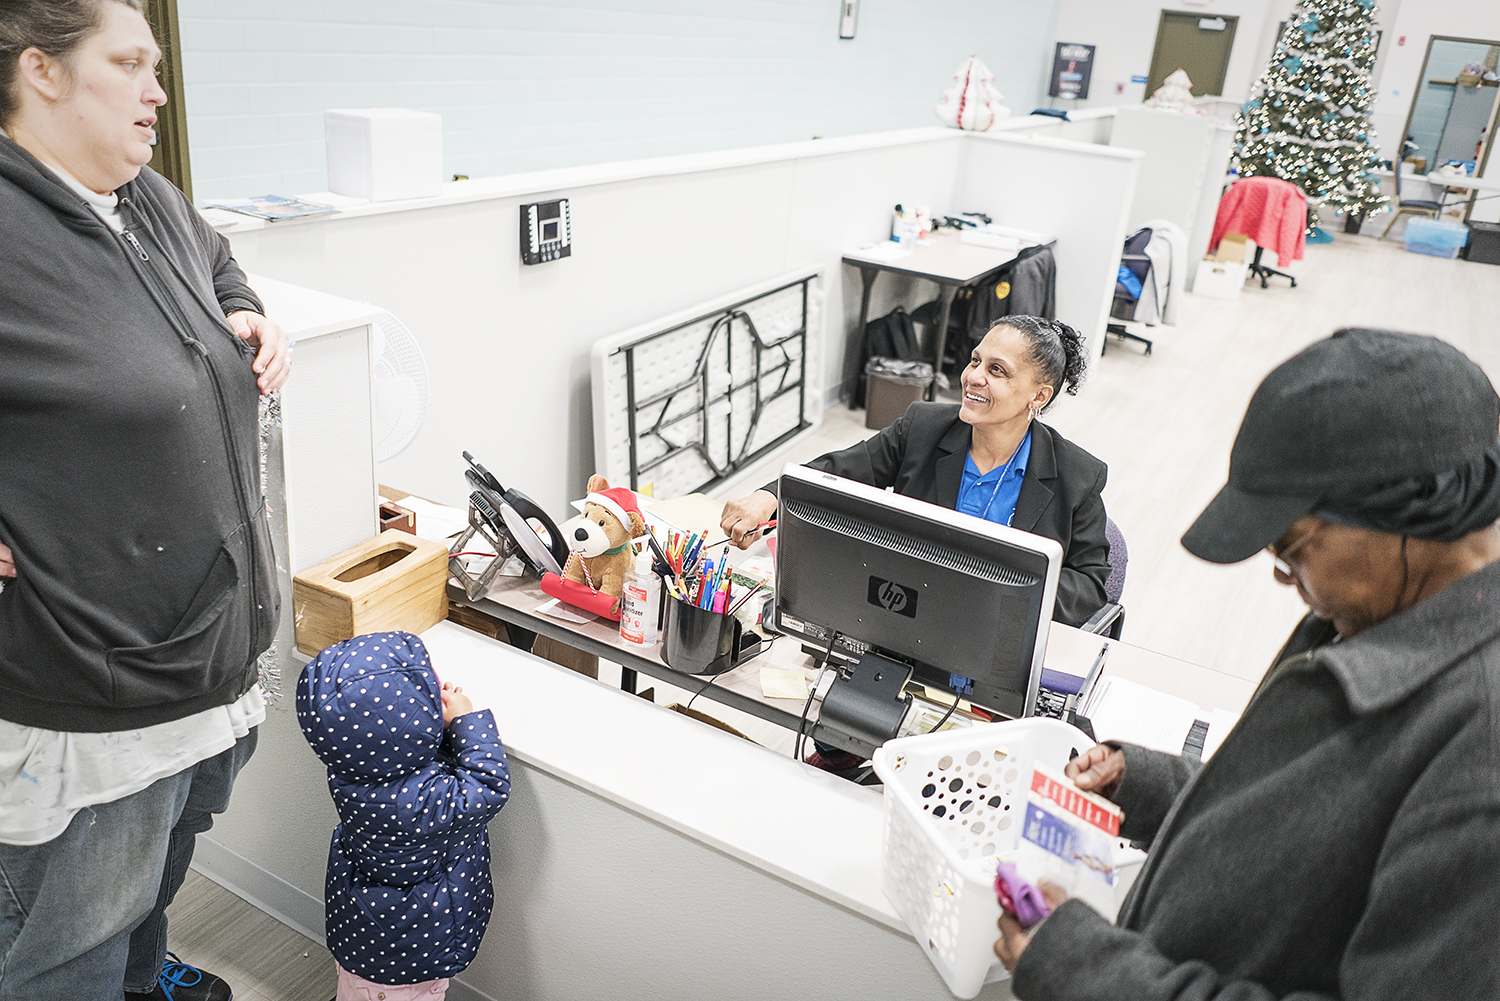 Redonna Riggs, 47, of Flint (center) assists clients at the Catholic Charities Community Closet at the Center for Hope. Riggs, the Community Closet Coordinator, has seen all aspects of the Catholic Charities program, having been a client at one point